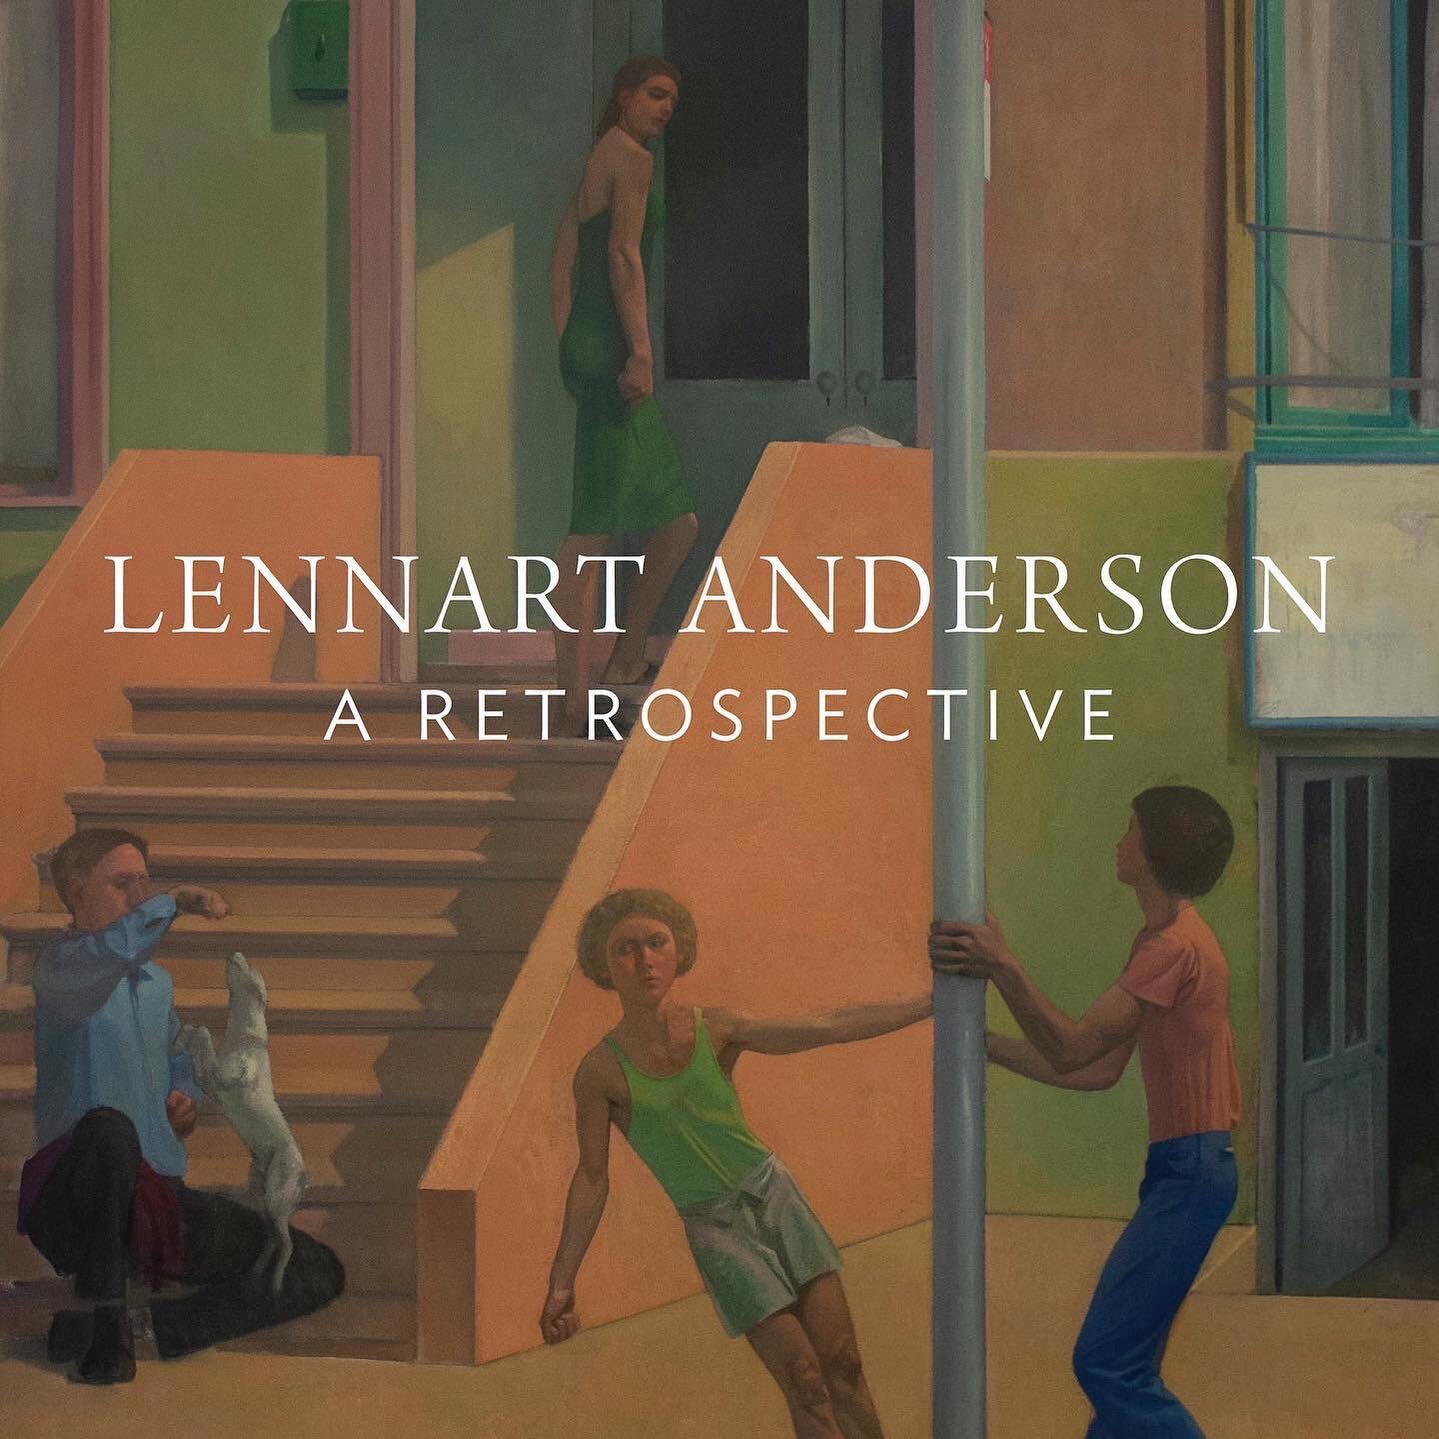 This is the most comprehensive publication to date on the painter Lennart Anderson (1928-2015). Anderson was described by the New York Times as one of the &ldquo;most prominent and admired painters to translate figurative art into a modern idiom.&rdq